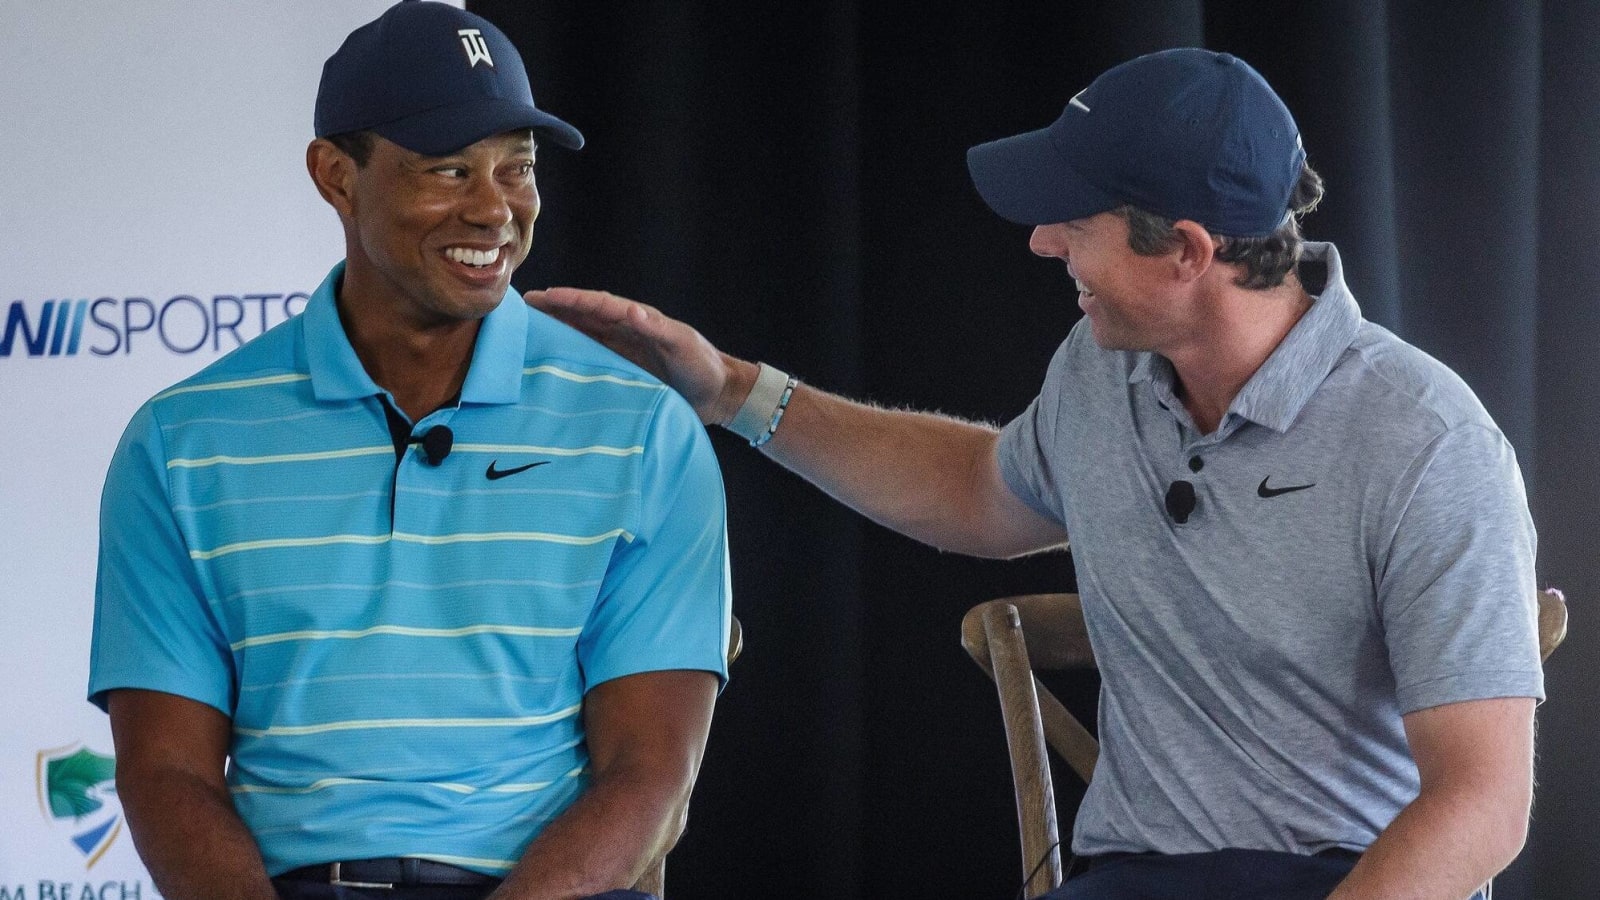 Tiger Woods-Rory McIlroy drama paints murky future for PGA